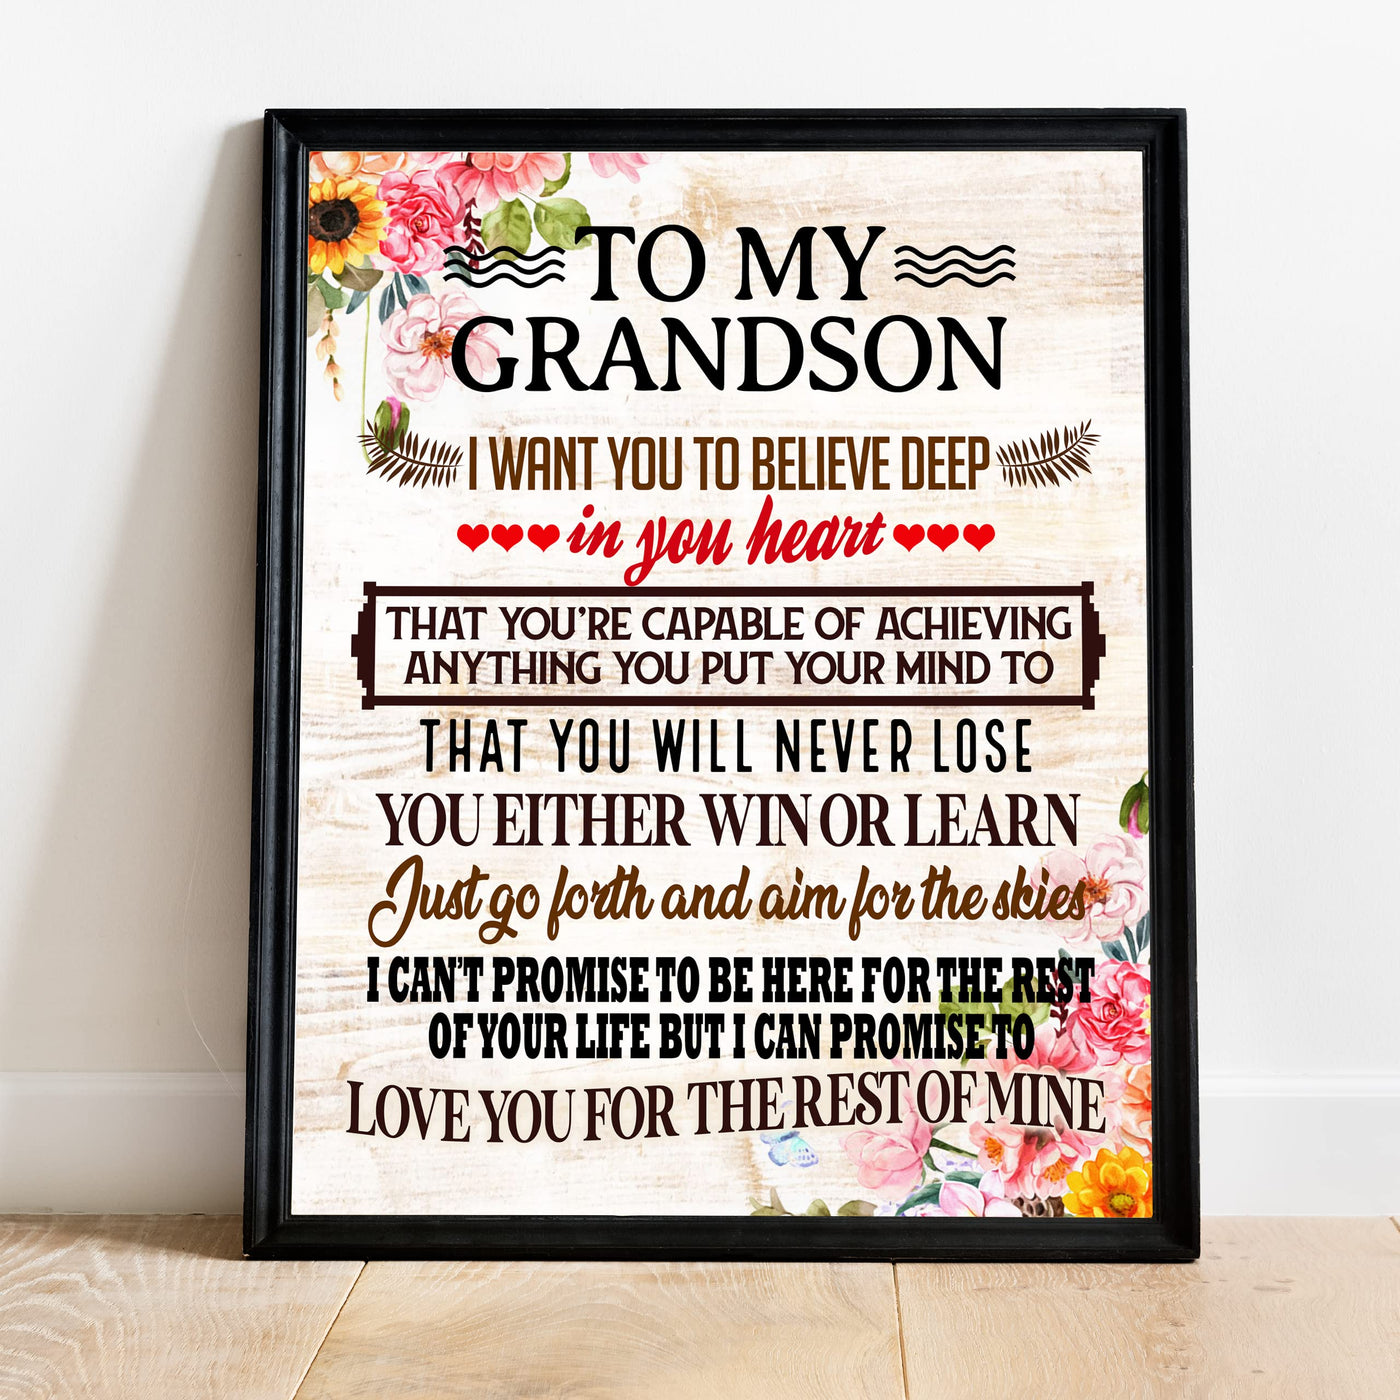 "To My Grandson -Aim For the Skies" Inspirational Love & Family Wall Art Decor -8x10" Rustic Floral Typography Print-Ready to Frame. Home-Bedroom-Office Decoration. Great Gift for Grandsons!